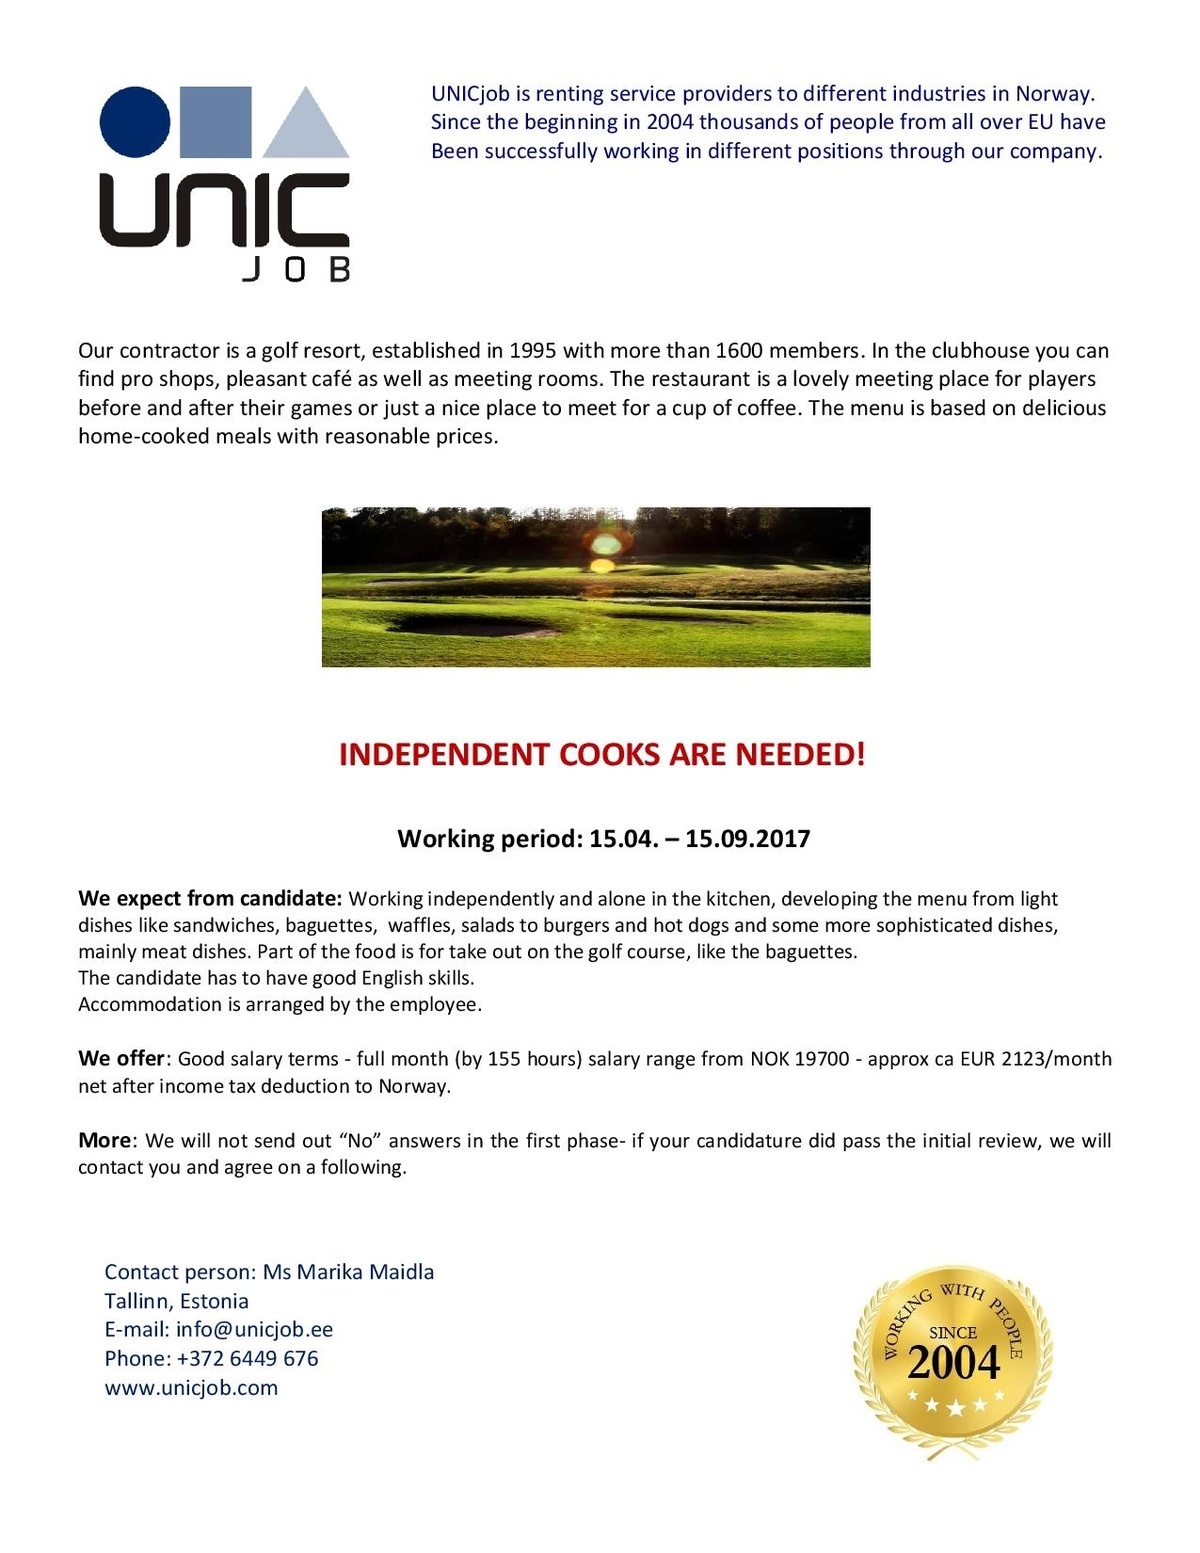 Unic Management OÜ 2 independent cooks to work in Norway 15.04 - 15.09.2017